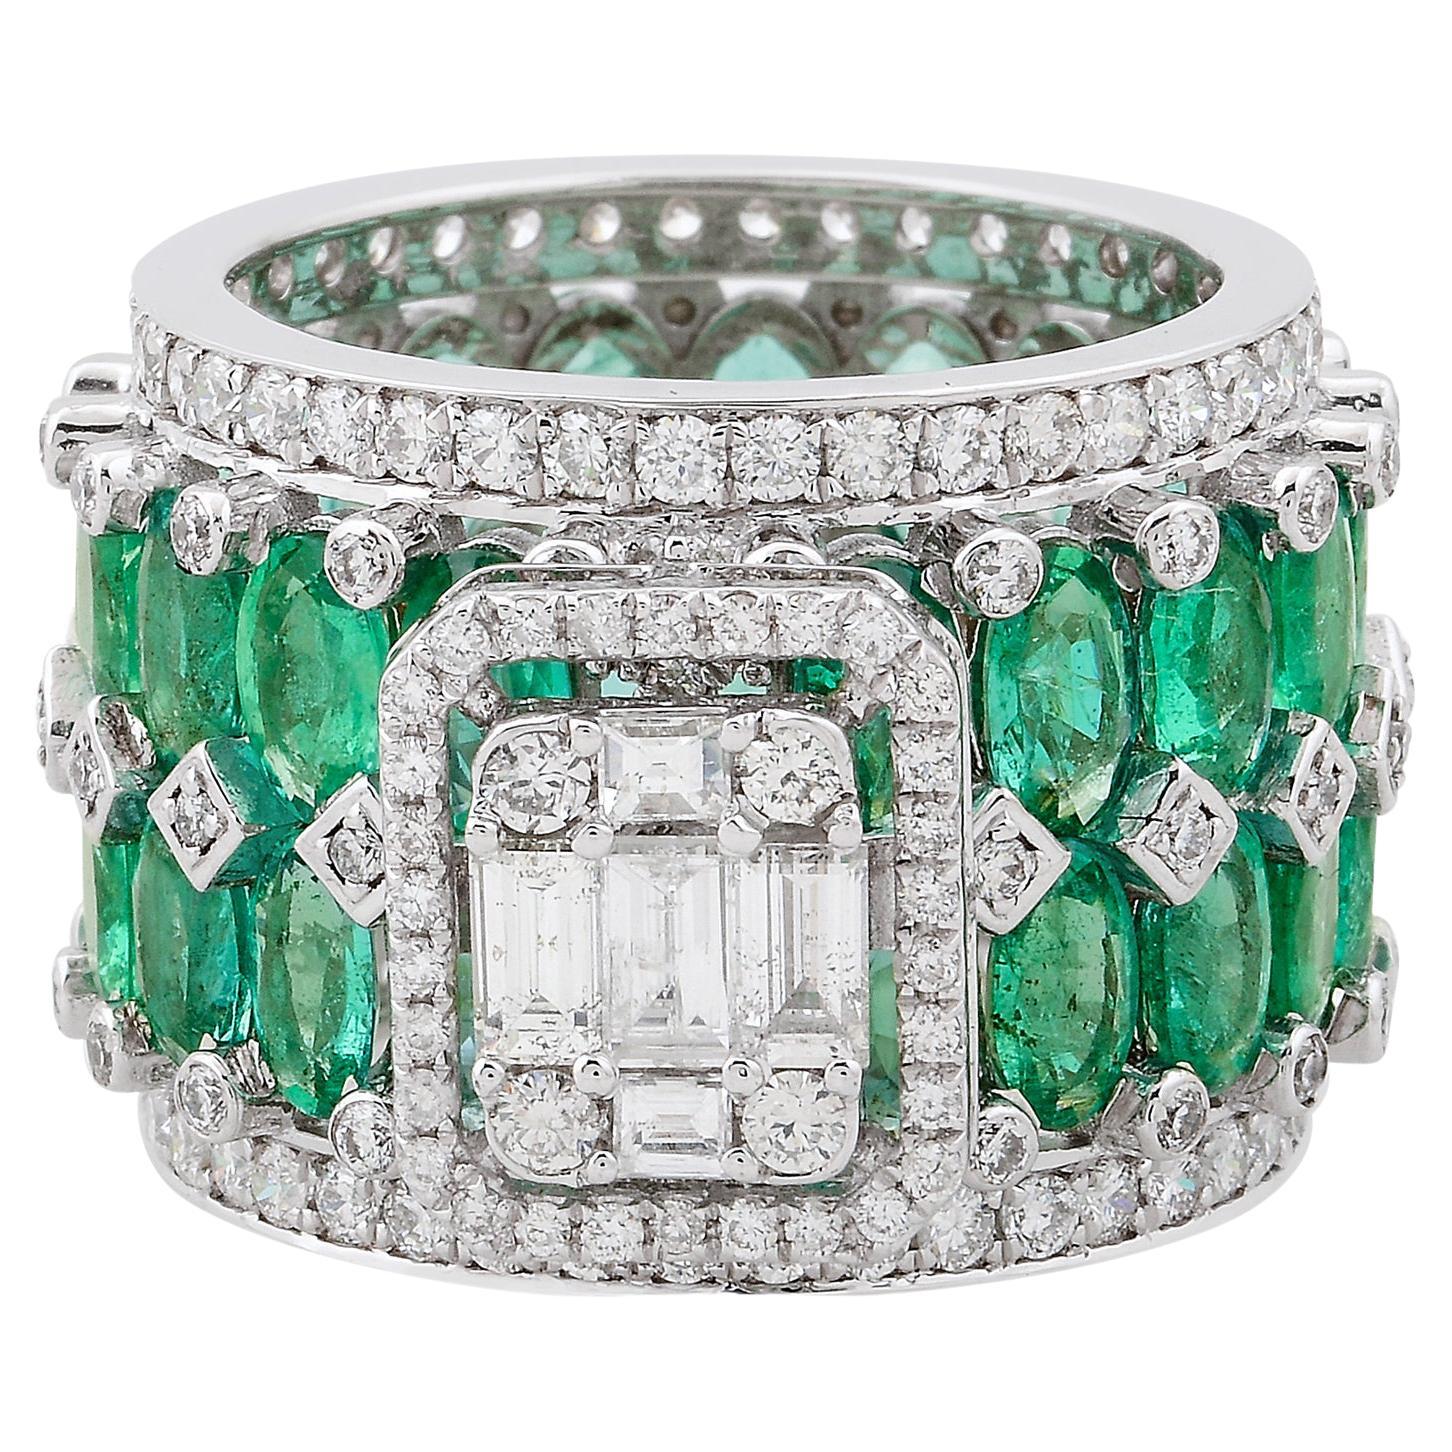 For Sale:  Oval Natural Emerald Gemstone Band Ring Baguette Diamond 18k White Gold Jewelry